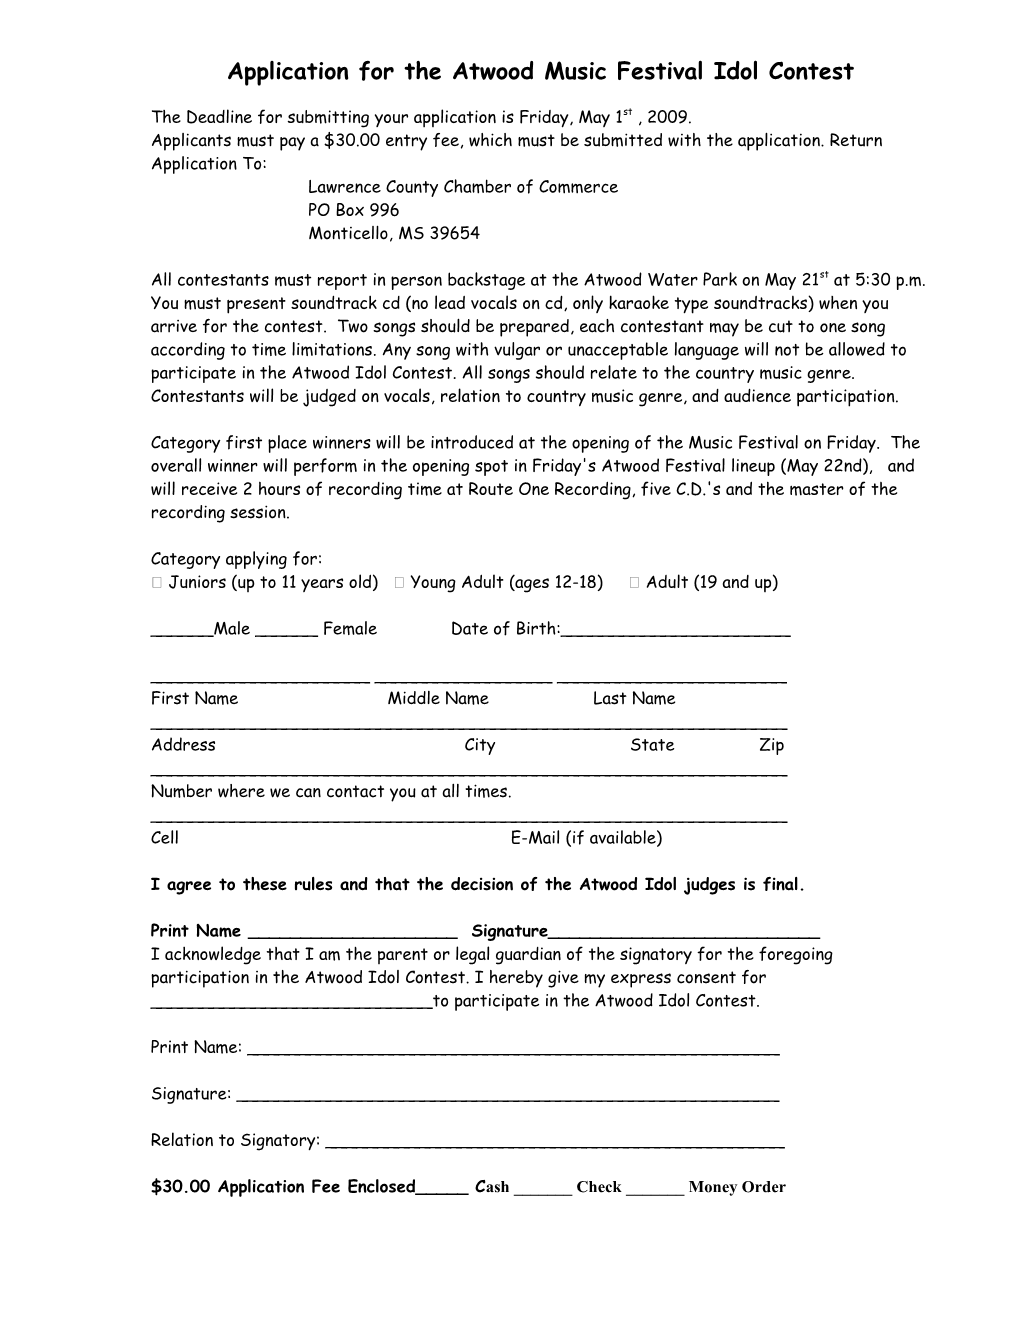 Application for the Atwood Music Festival Idol Contest